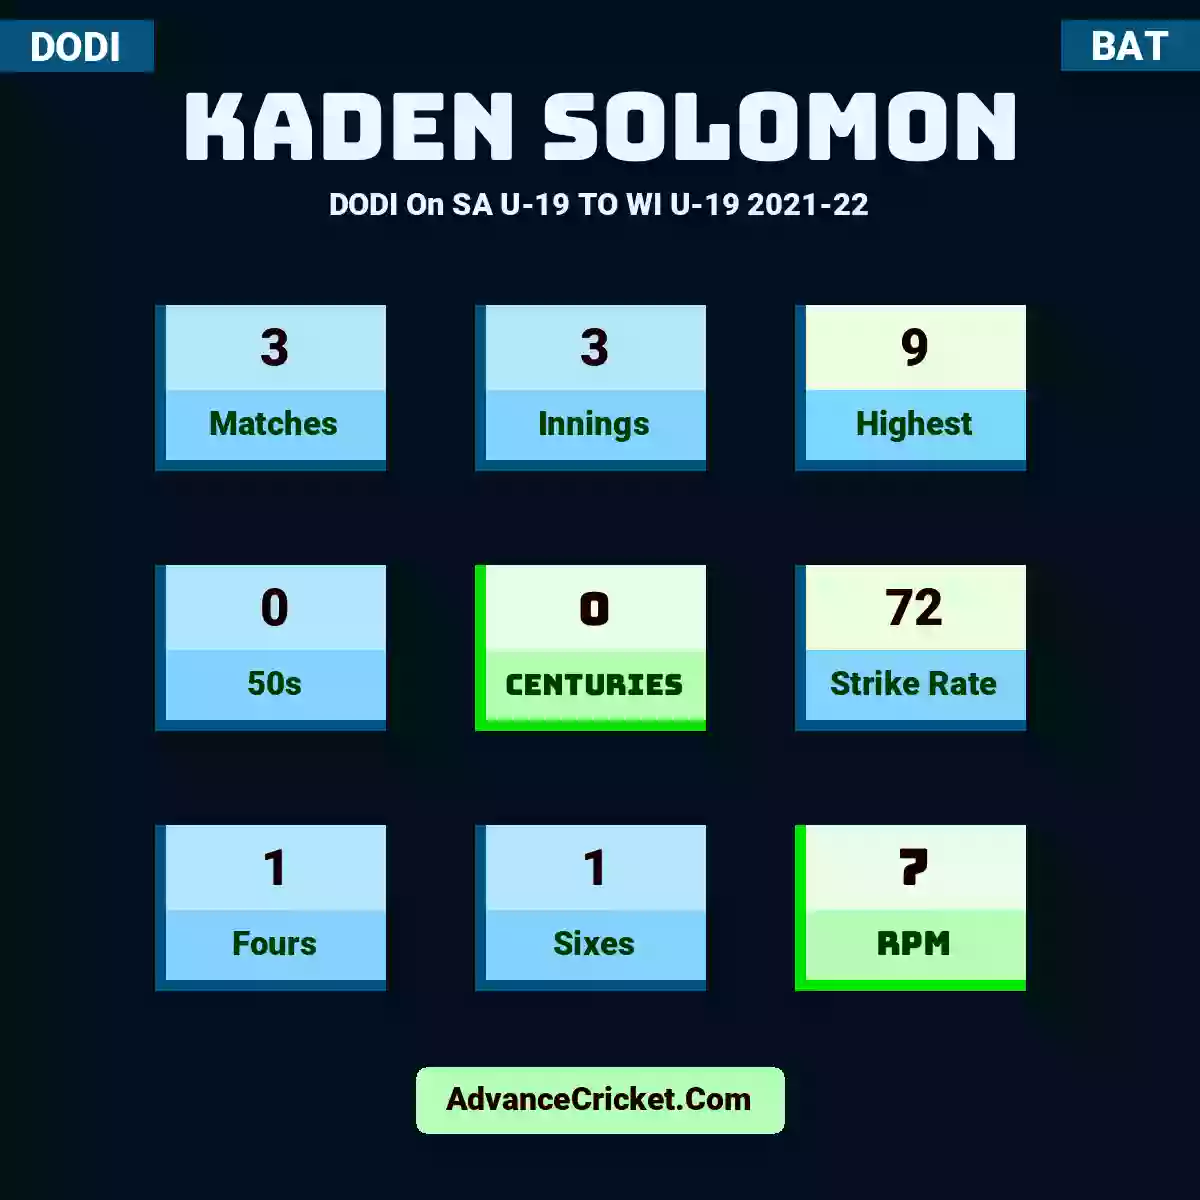 Kaden Solomon DODI  On SA U-19 TO WI U-19 2021-22, Kaden Solomon played 3 matches, scored 9 runs as highest, 0 half-centuries, and 0 centuries, with a strike rate of 72. K.Solomon hit 1 fours and 1 sixes, with an RPM of 7.